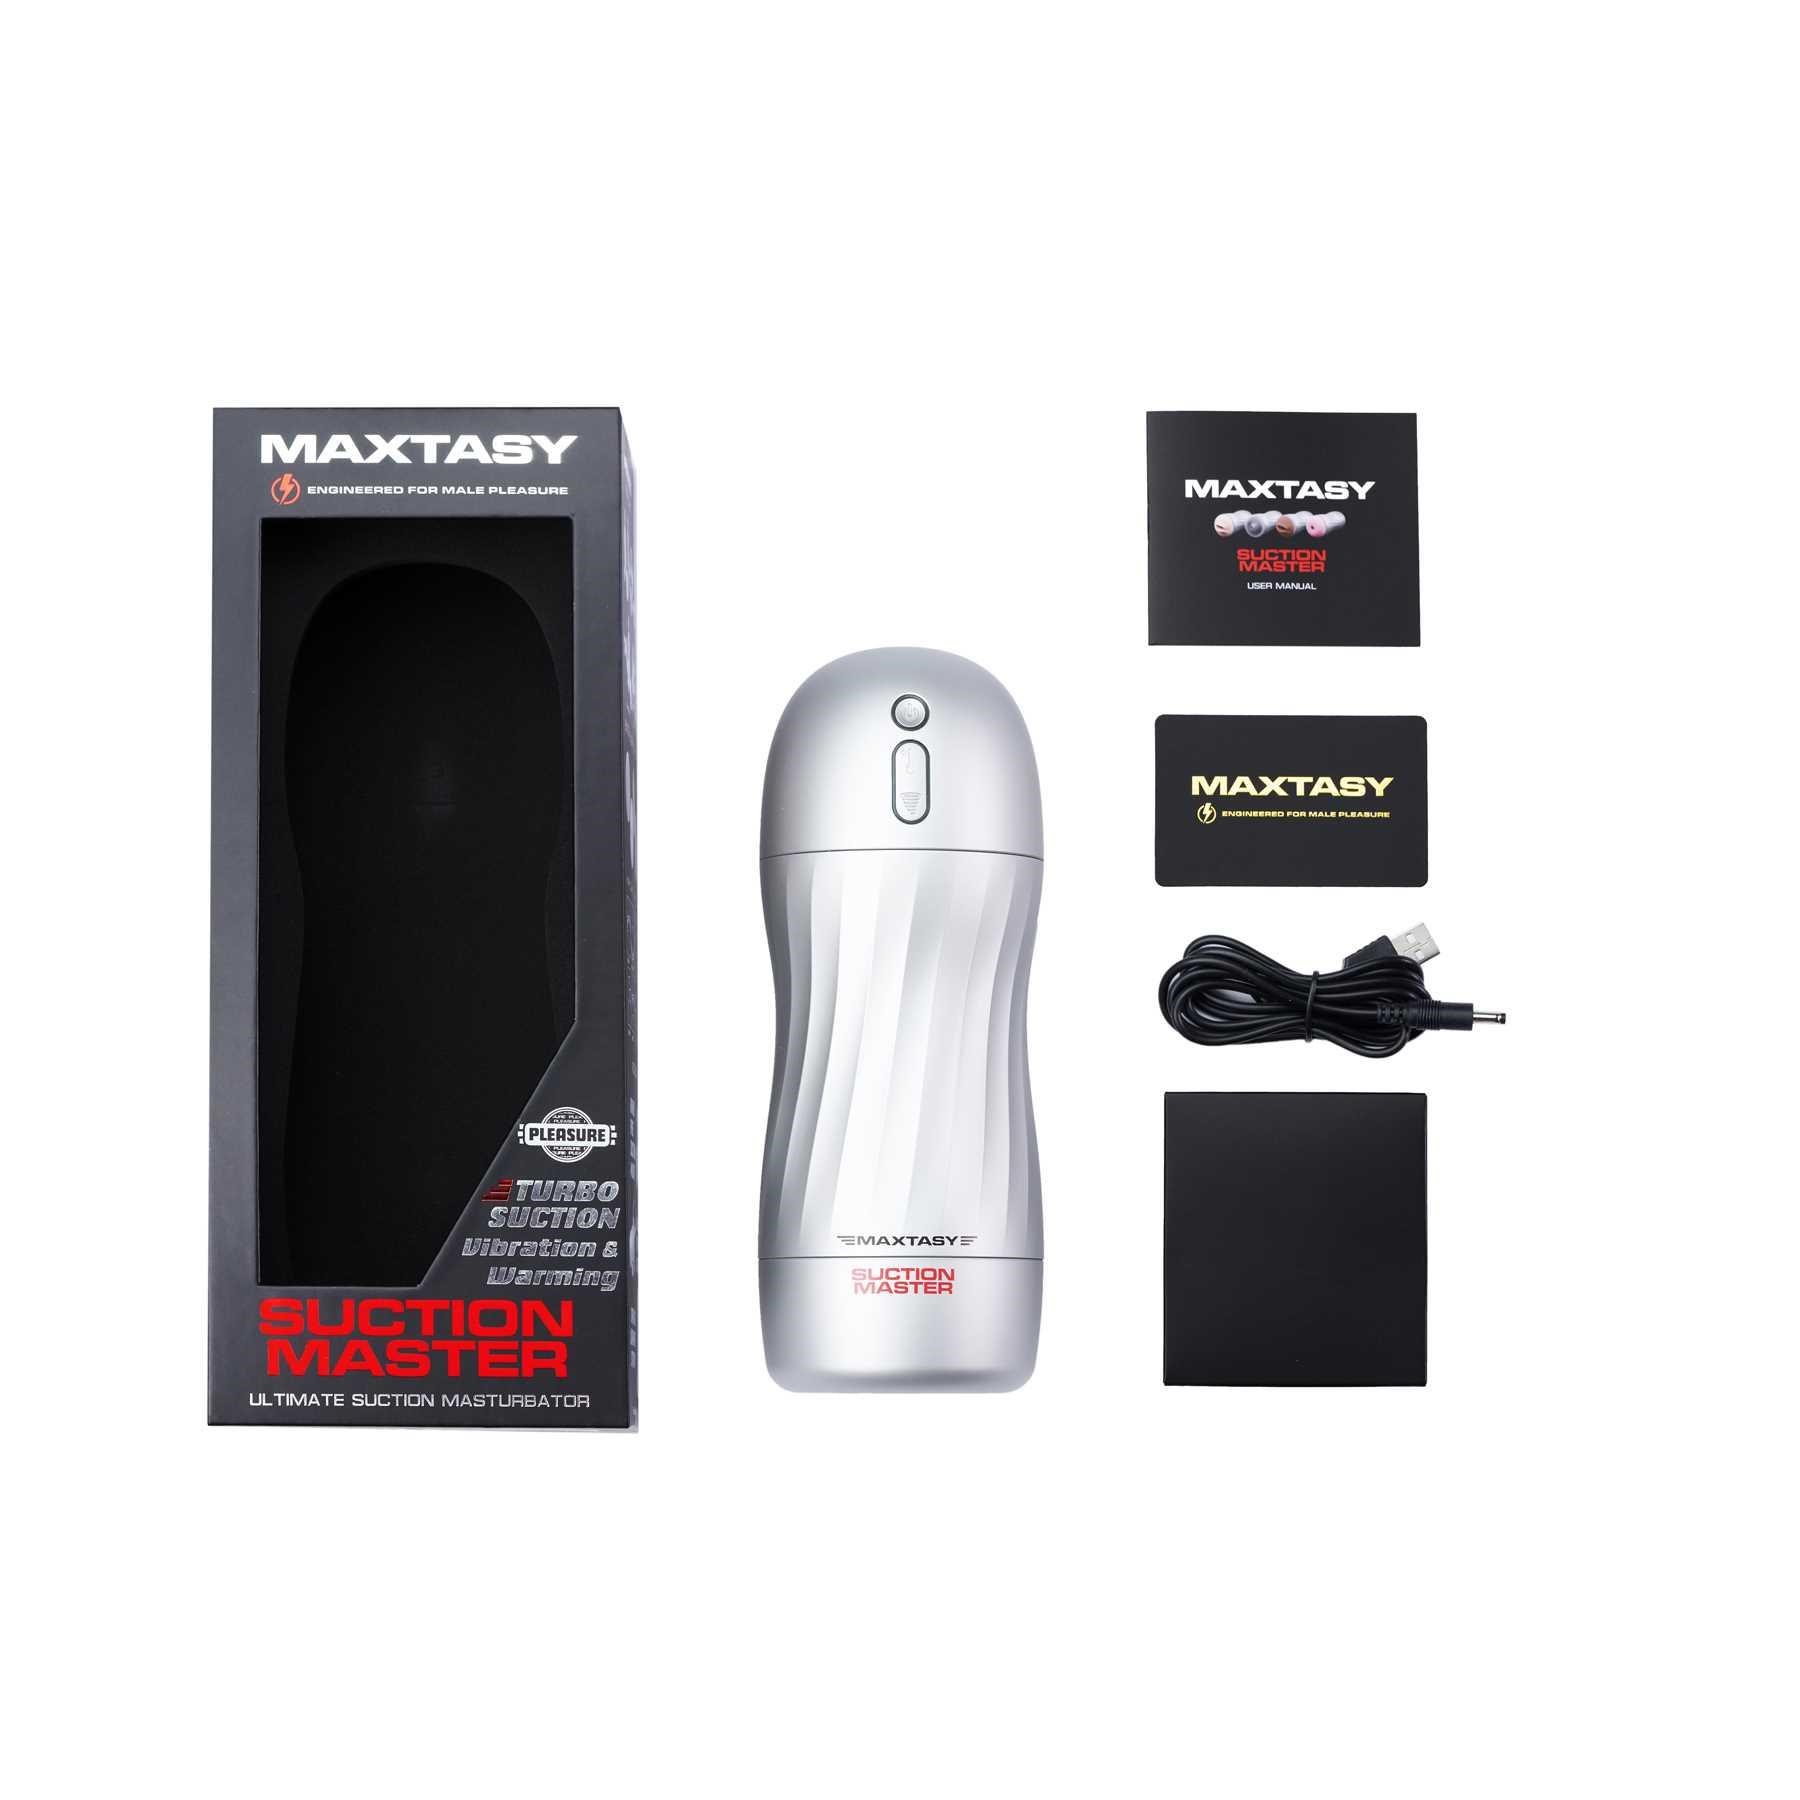 Maxtasy Suction Master Stroker - Realistic Nude Mouth with accessories and box